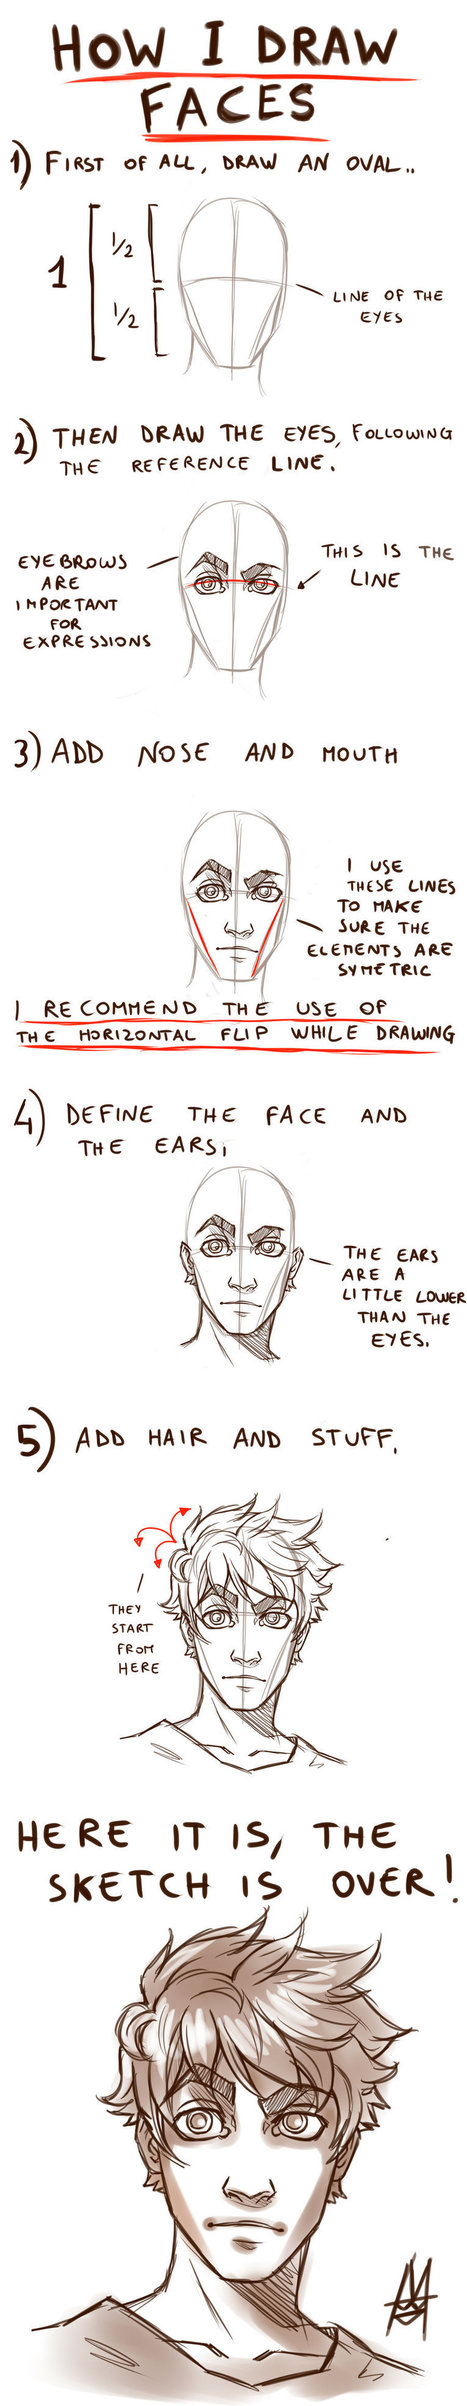 Tutorial HOW TO DRAW A FACE | Drawing and Painting Tutorials | Scoop.it